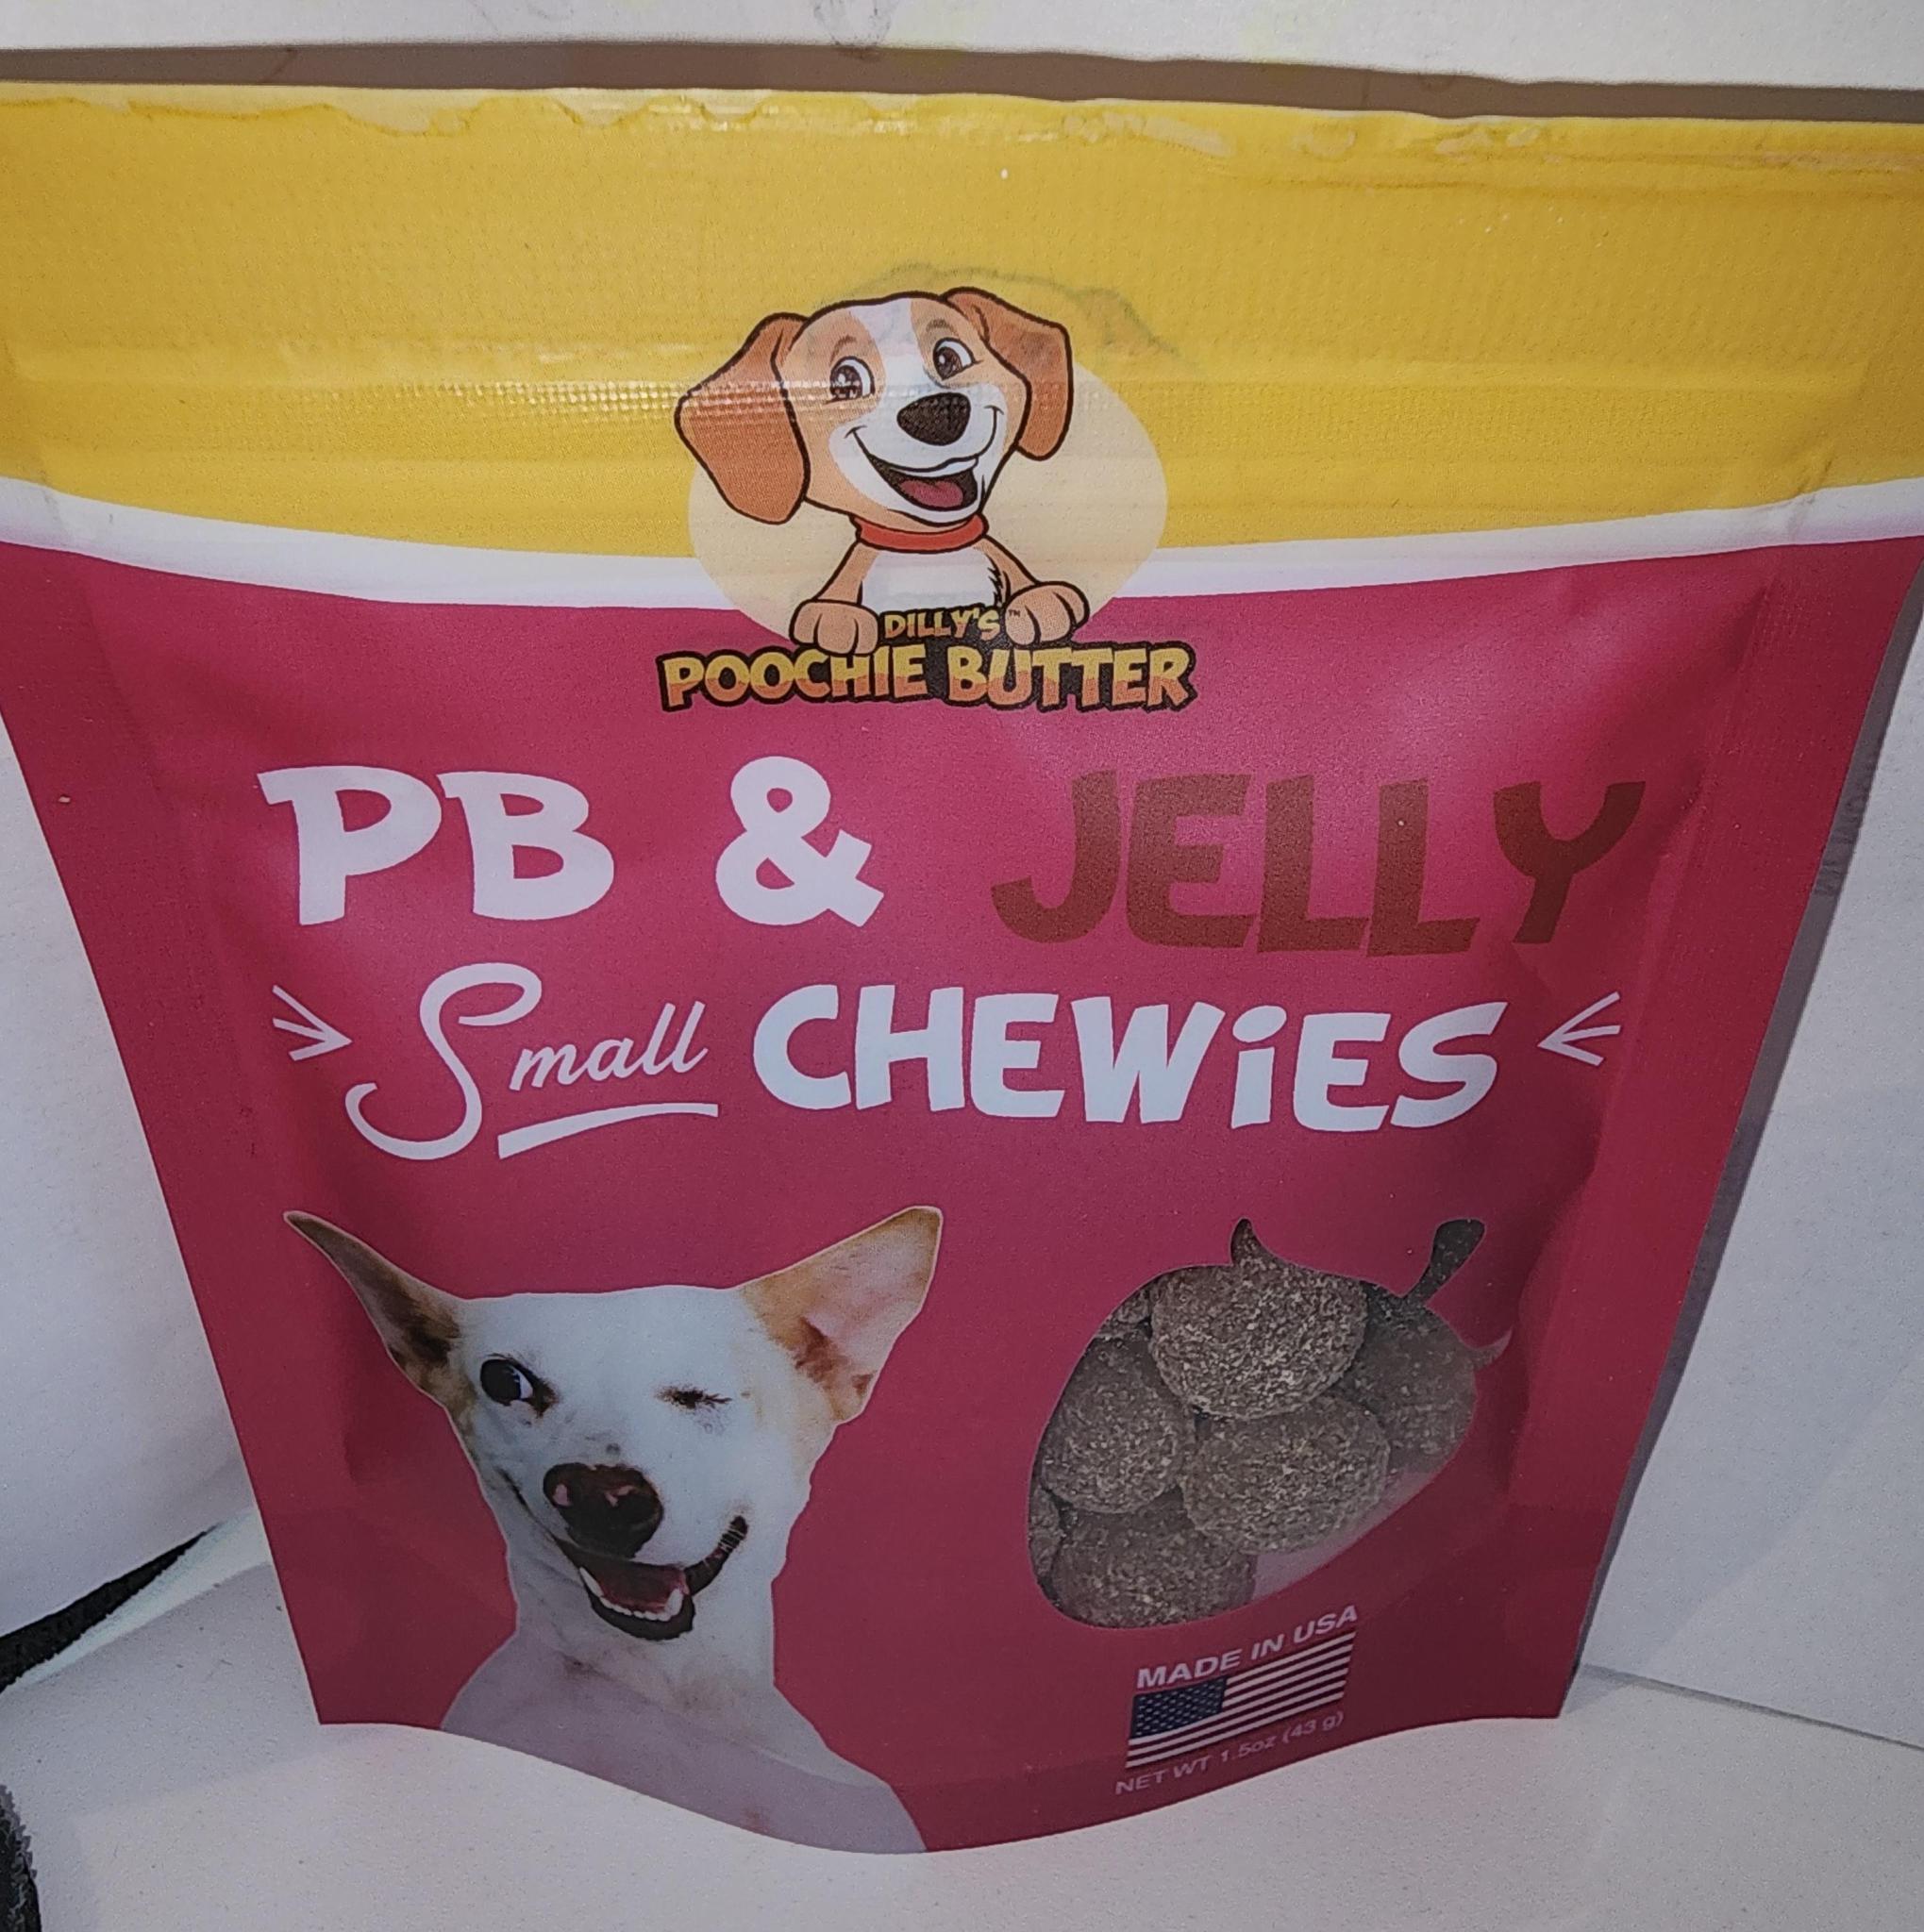 Poochie Butter PB & Jelly Small Chewies